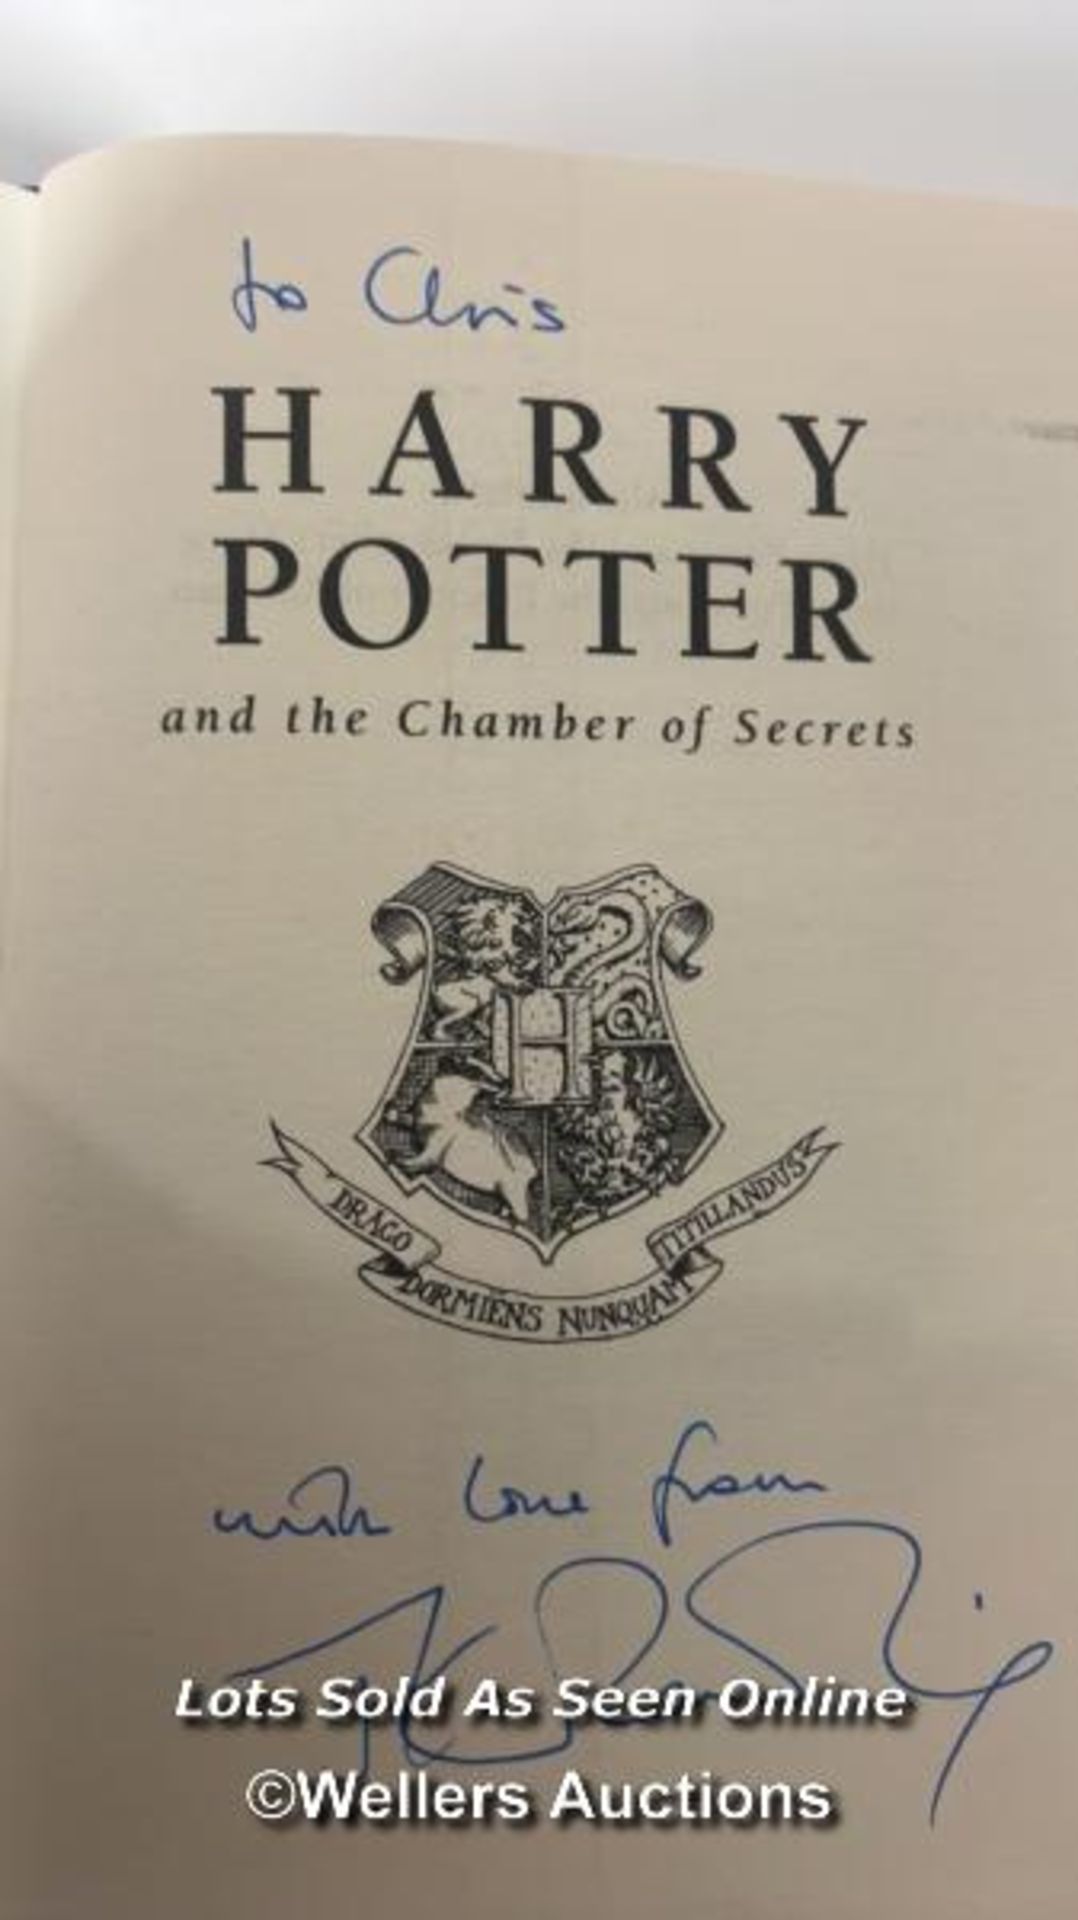 *Harry Potter - J.K. Rowling signed Harry Potter and the Chamber of Secrets, Bloomsbury 1998, - Image 2 of 6